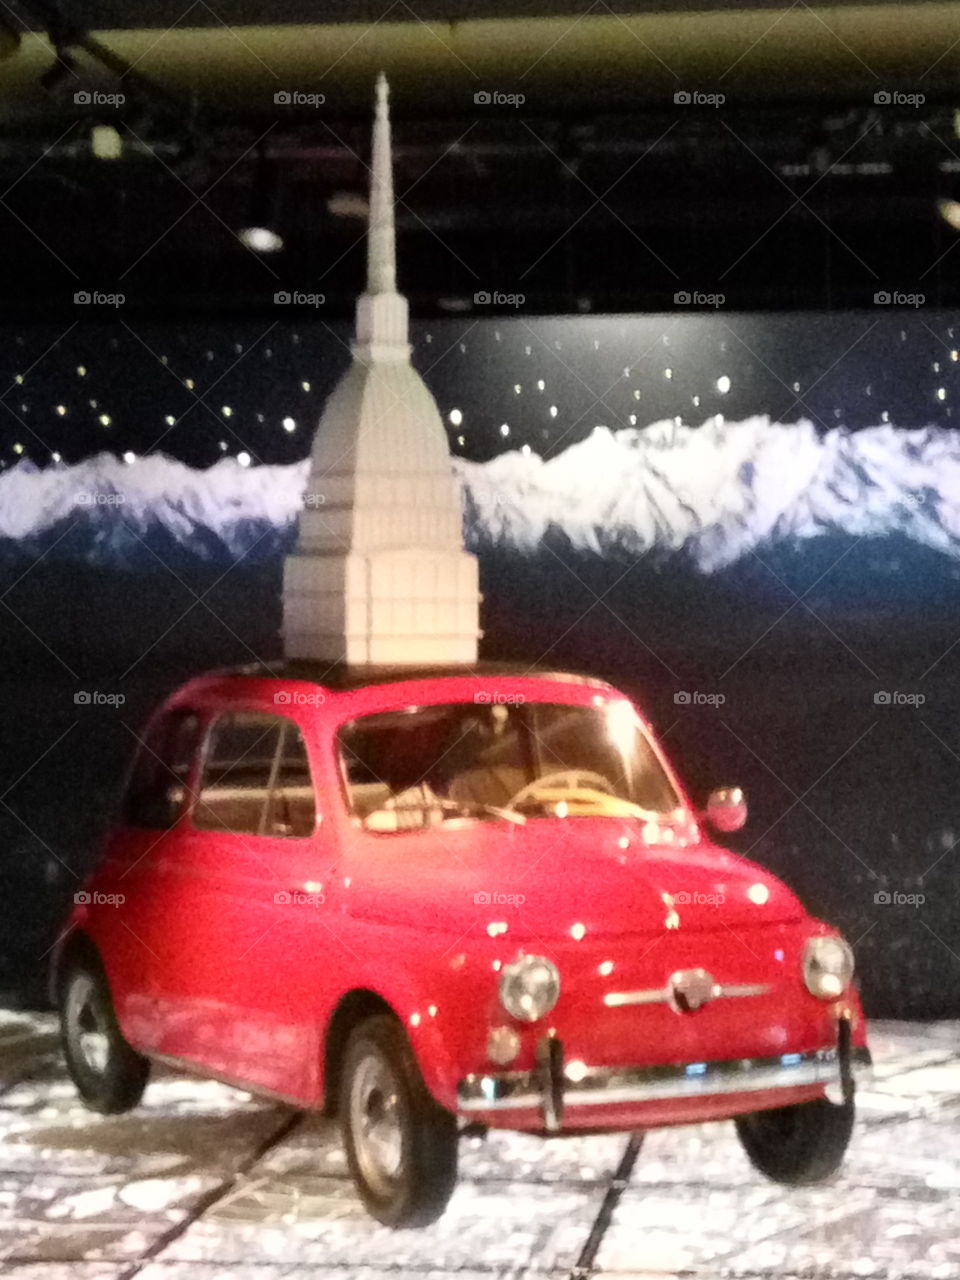 Fiat cinquecento (500) with Torino tower on it!